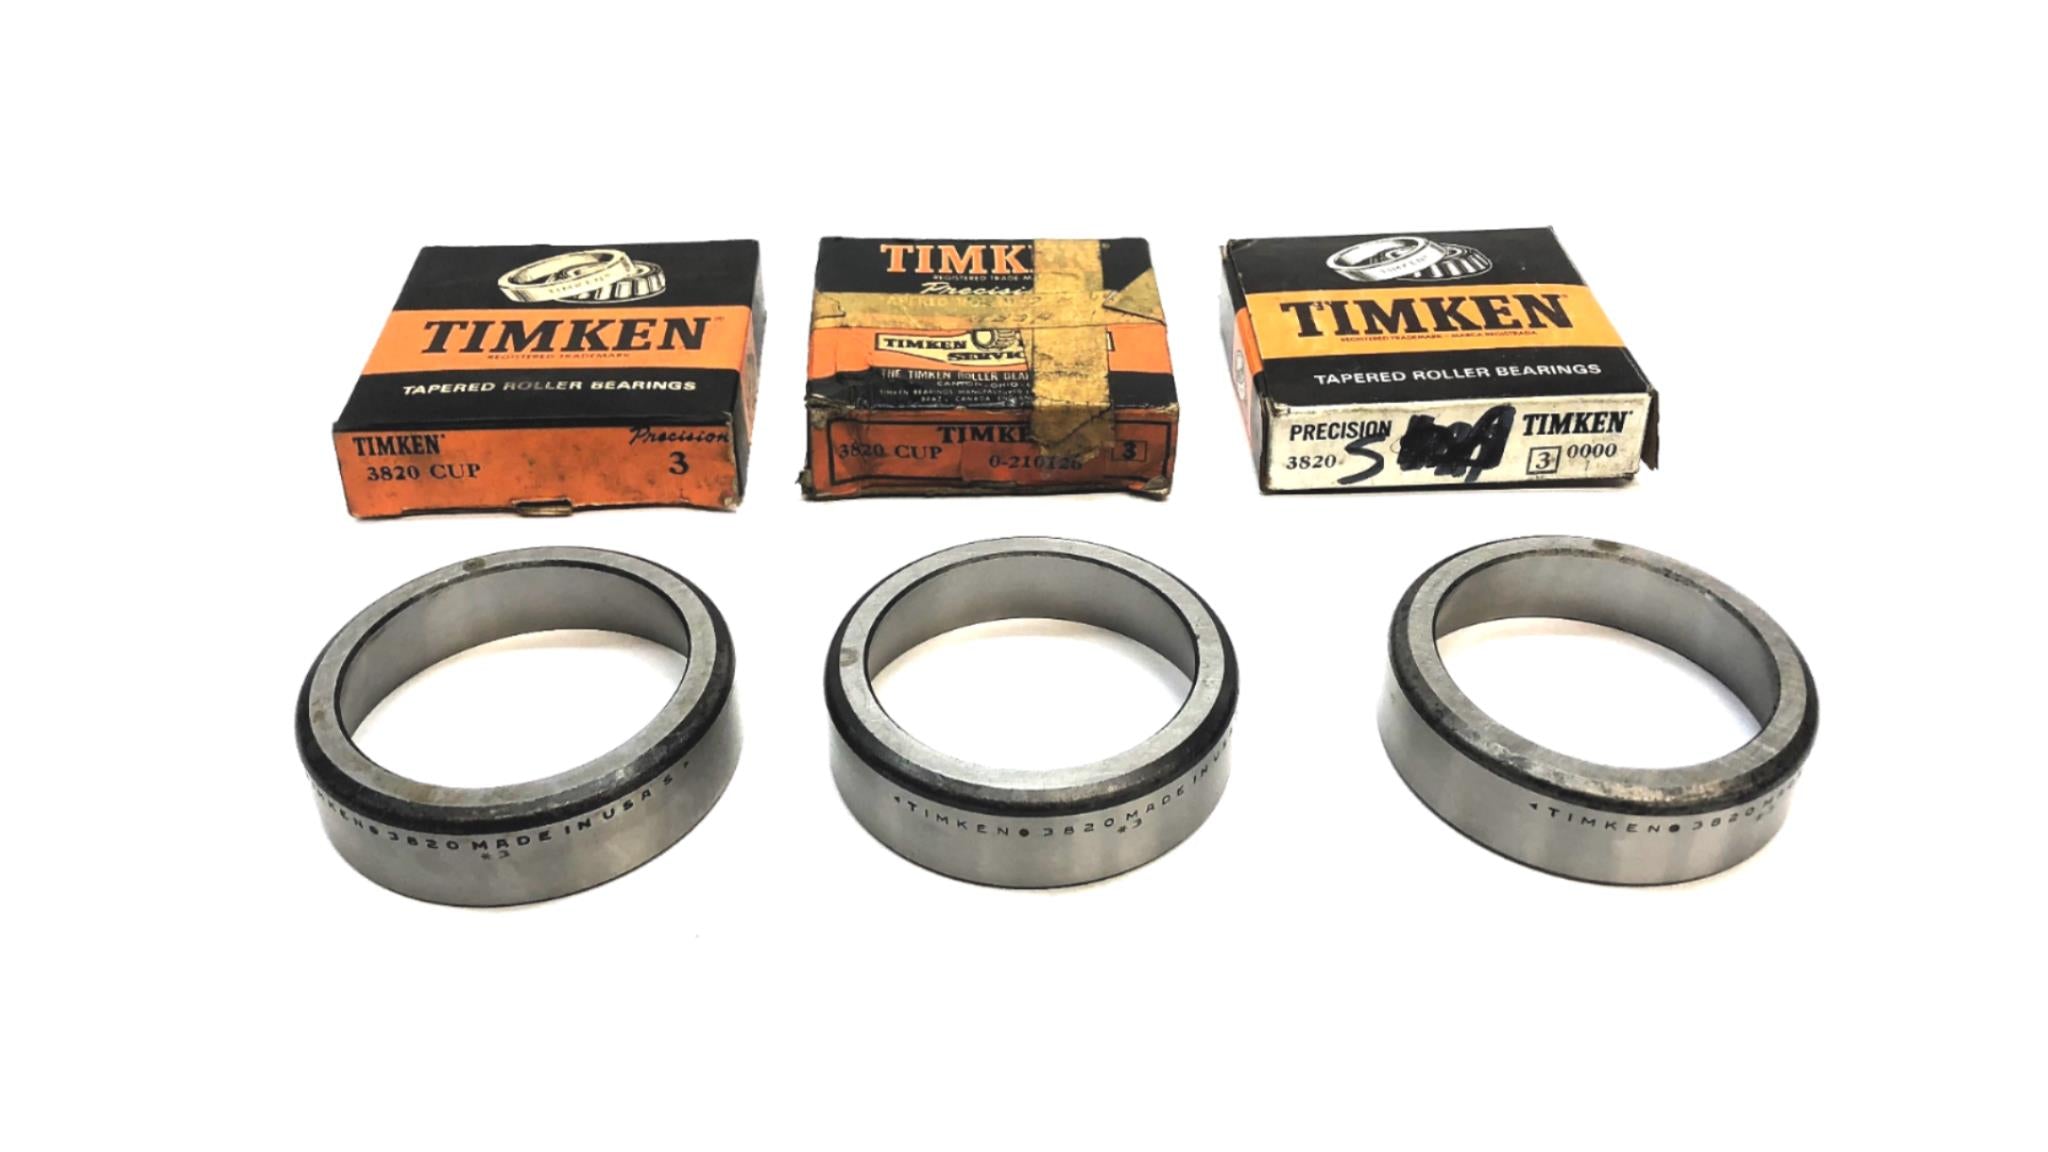 Timken Tapered Roller Bearing Cup 3820 [Lot of 3] NOS